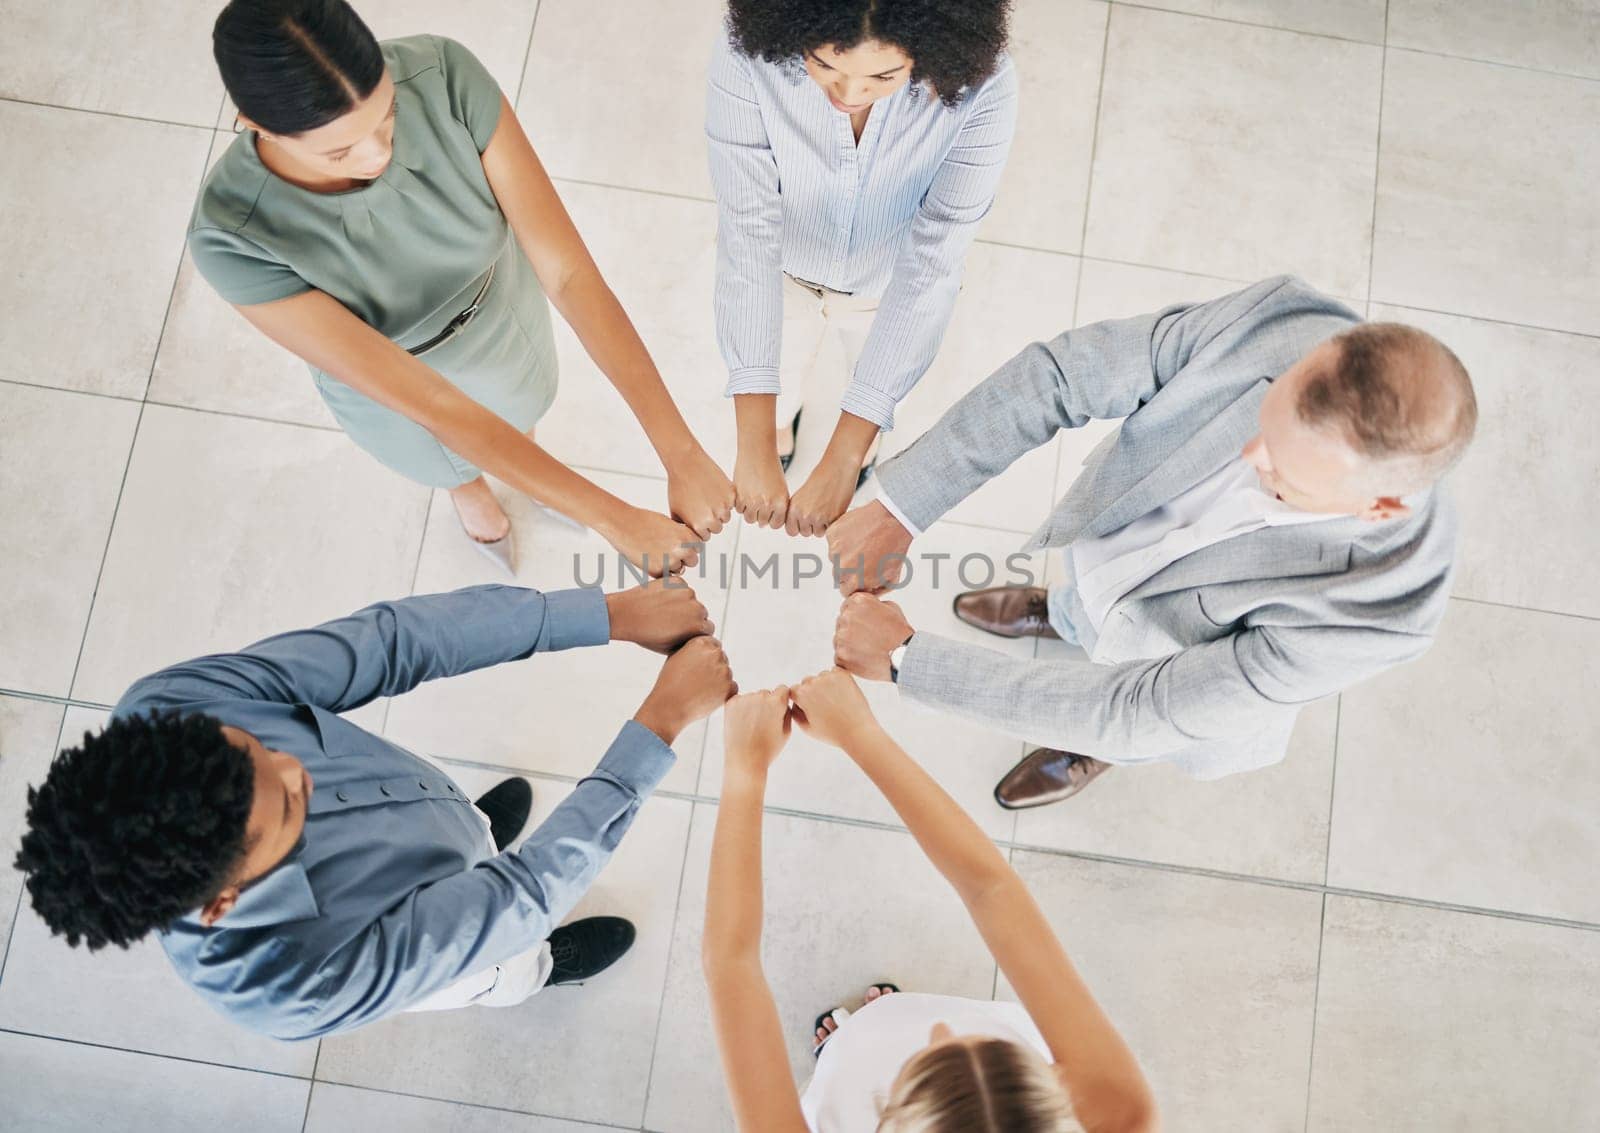 Above, business people and fist bump circle in office for teamwork, motivation and support for success. Corporate group, vision and team building in workplace with diversity, solidarity and mission by YuriArcurs